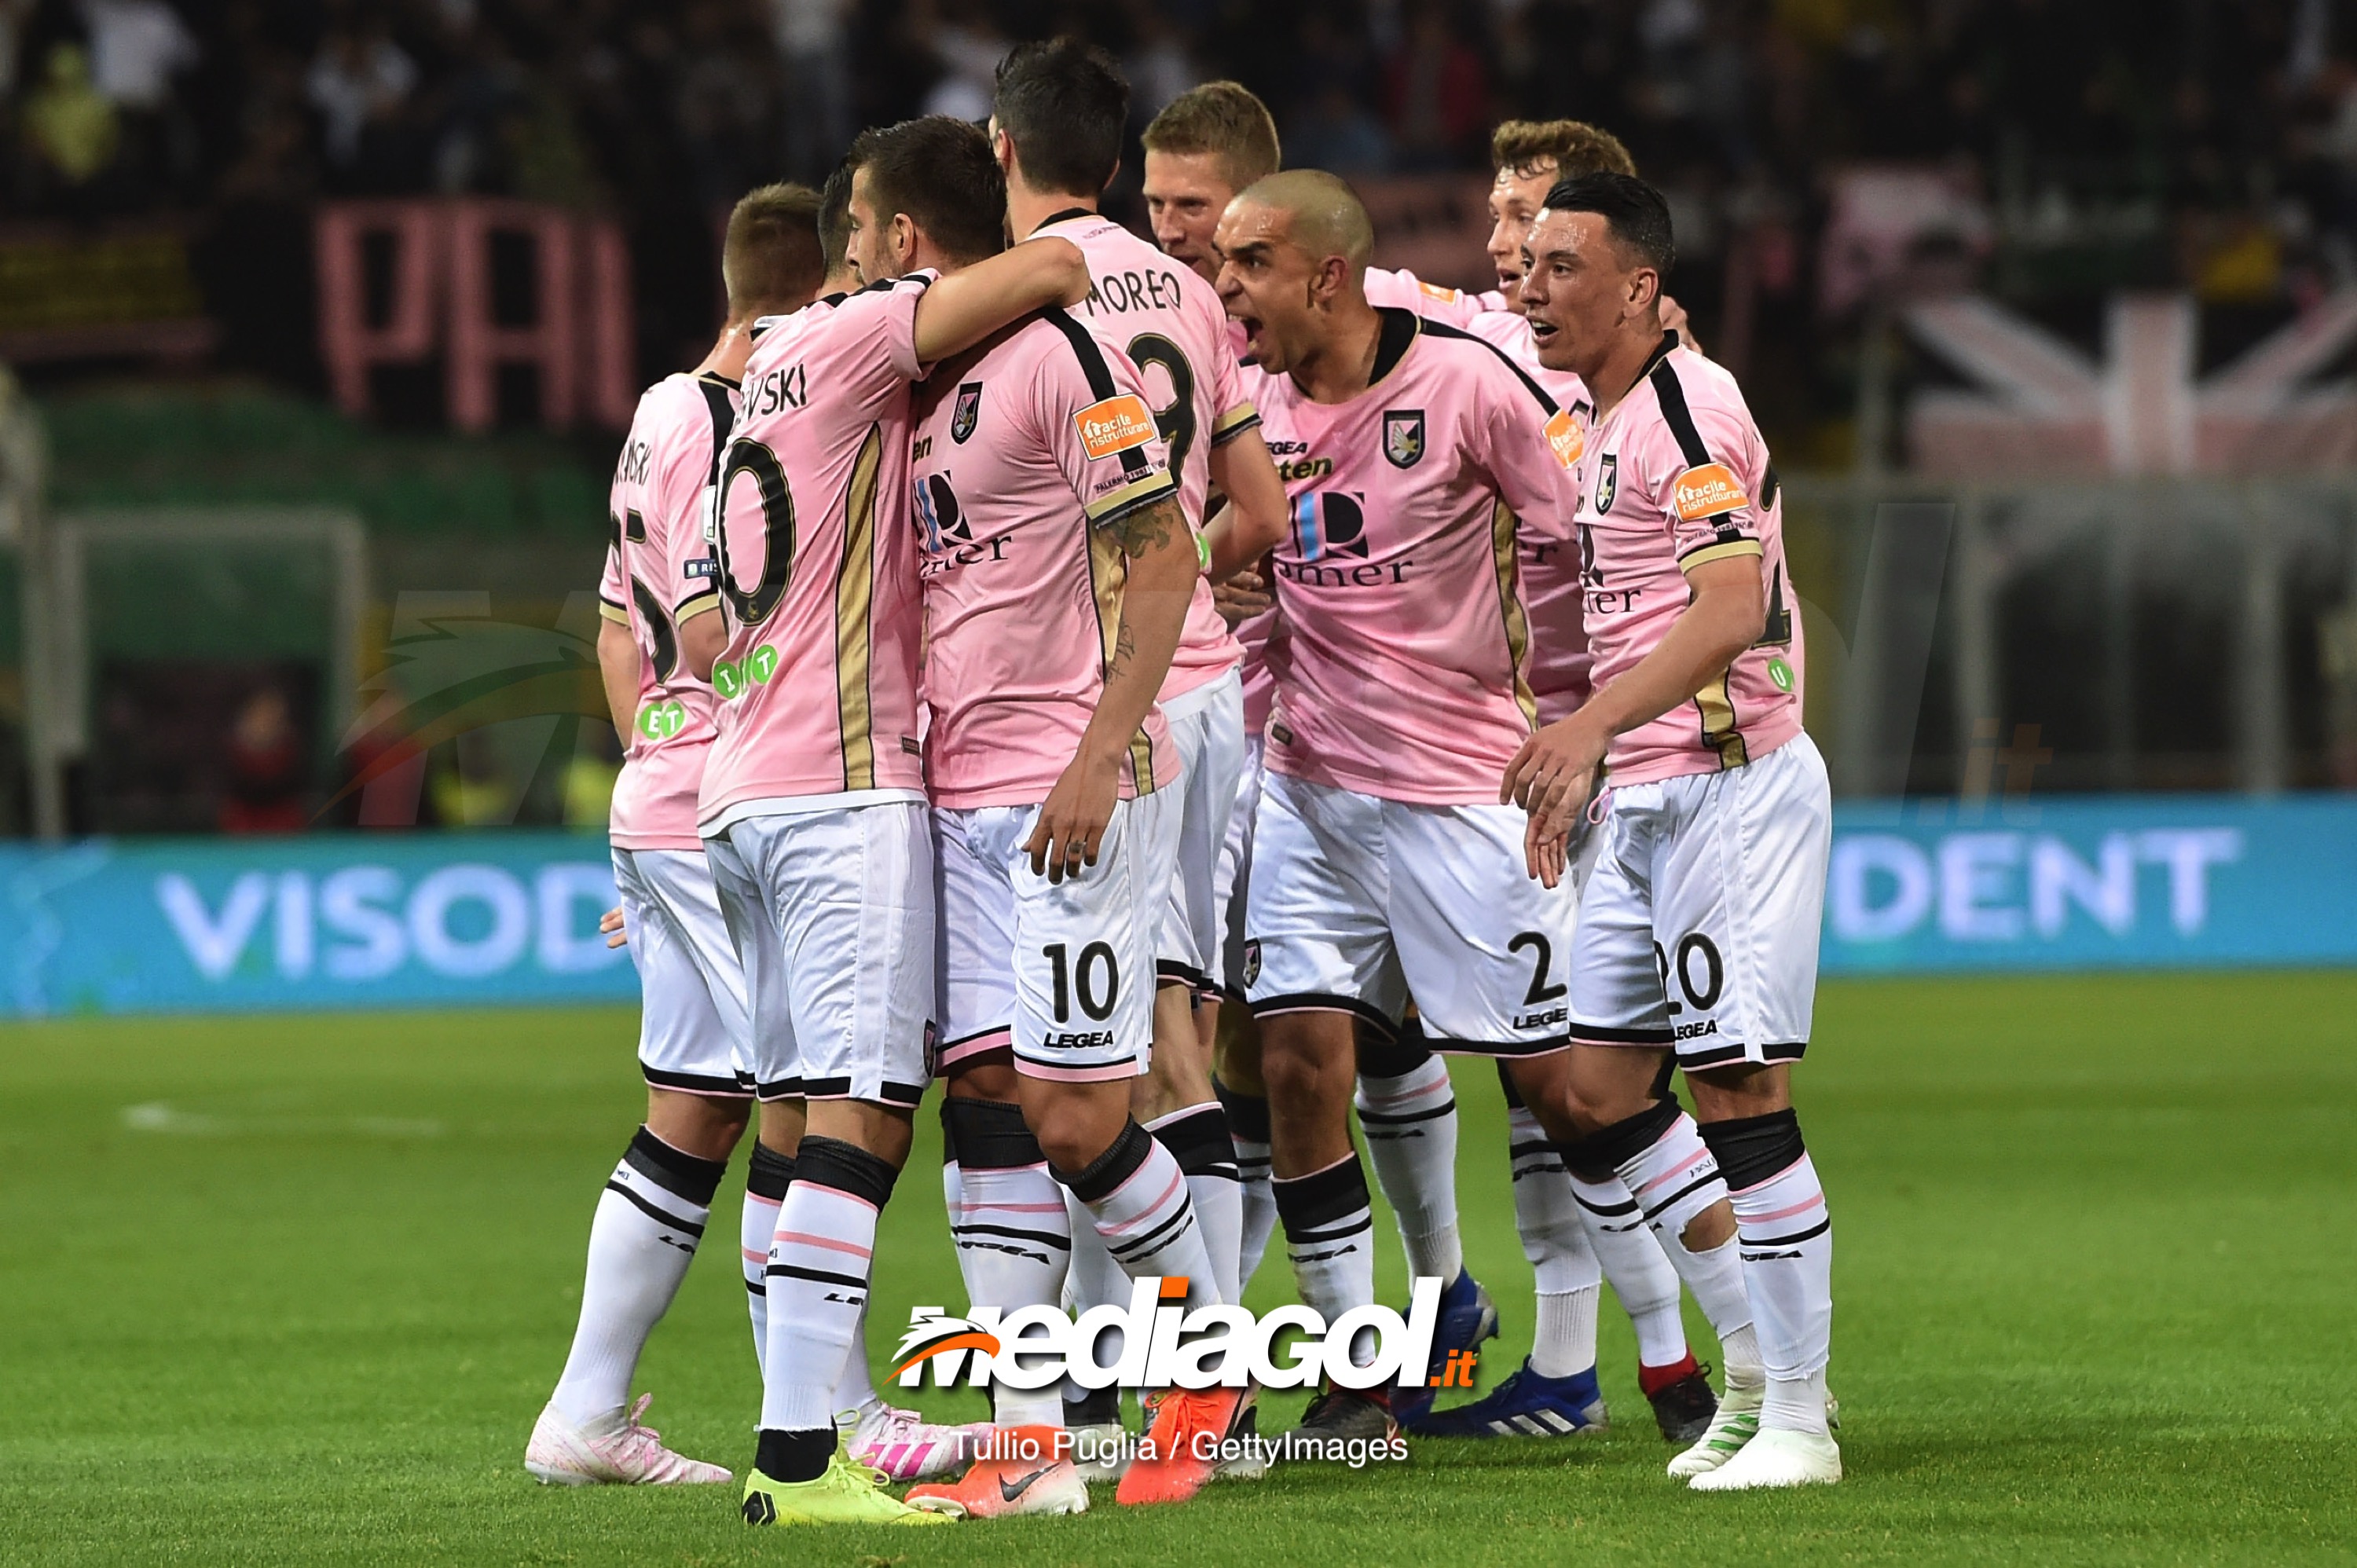 PALERMO, ITALY - APRIL 22: Aleksandar Trajkovski of Palermo celebrates after scoring the opening goal during the Serie B match between US Citta di Palermo and Padova at Stadio Renzo Barbera on April 22, 2019 in Palermo, Italy. (Photo by Tullio M. Puglia/Getty Images)